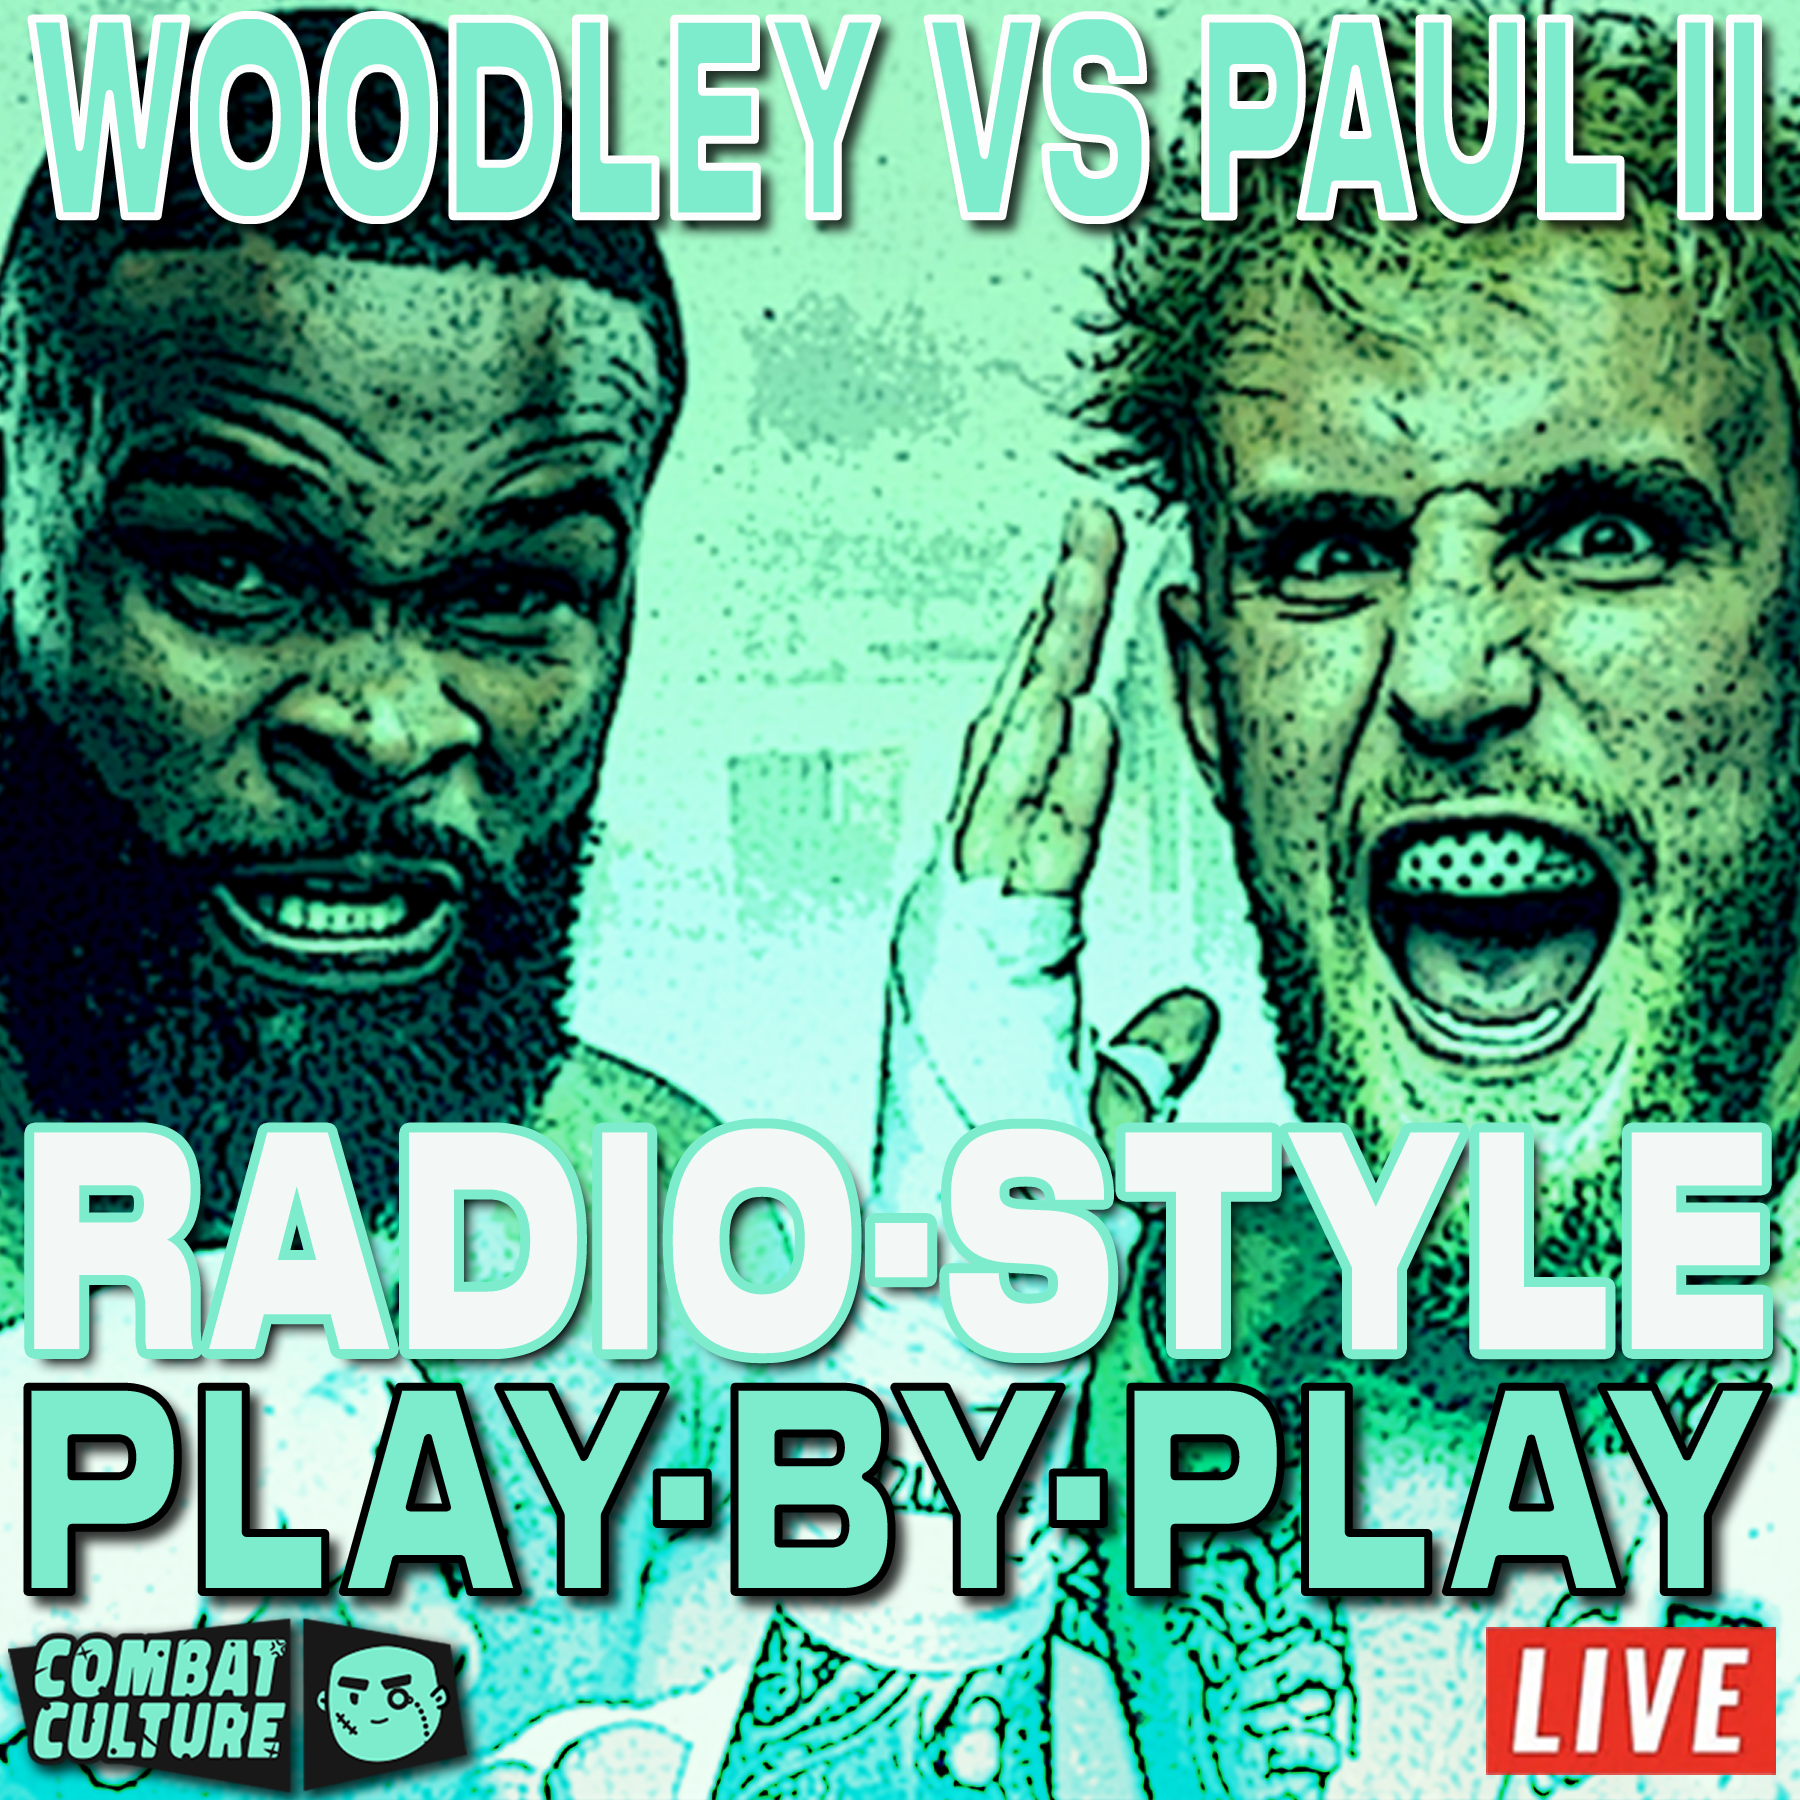 Tyron Woodley vs Jake Paul 2, Woodley vs Paul 2, Boxing, Showtime Sports, Radio-Style Commentary, Play-by-Play, Combat Culture YouTube, Matt Ryan, UFC Podcast, Shakiel Mahjouri, Live Stream, Boxing Exhibition,